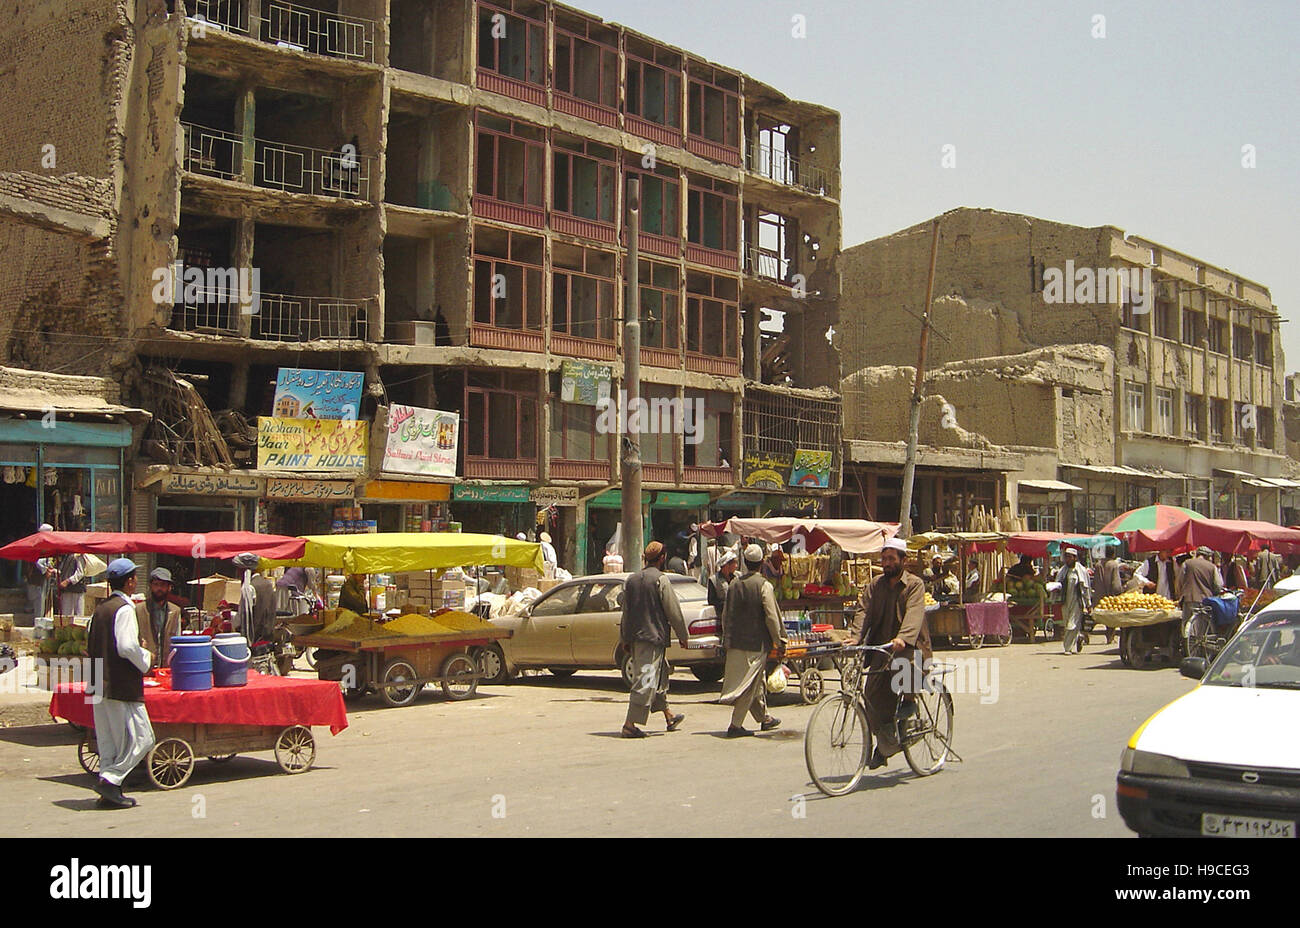 29th May 2004 A typical street scene in Kabul, Afghanistan: a street market next to bomb-damaged buildings. Stock Photo